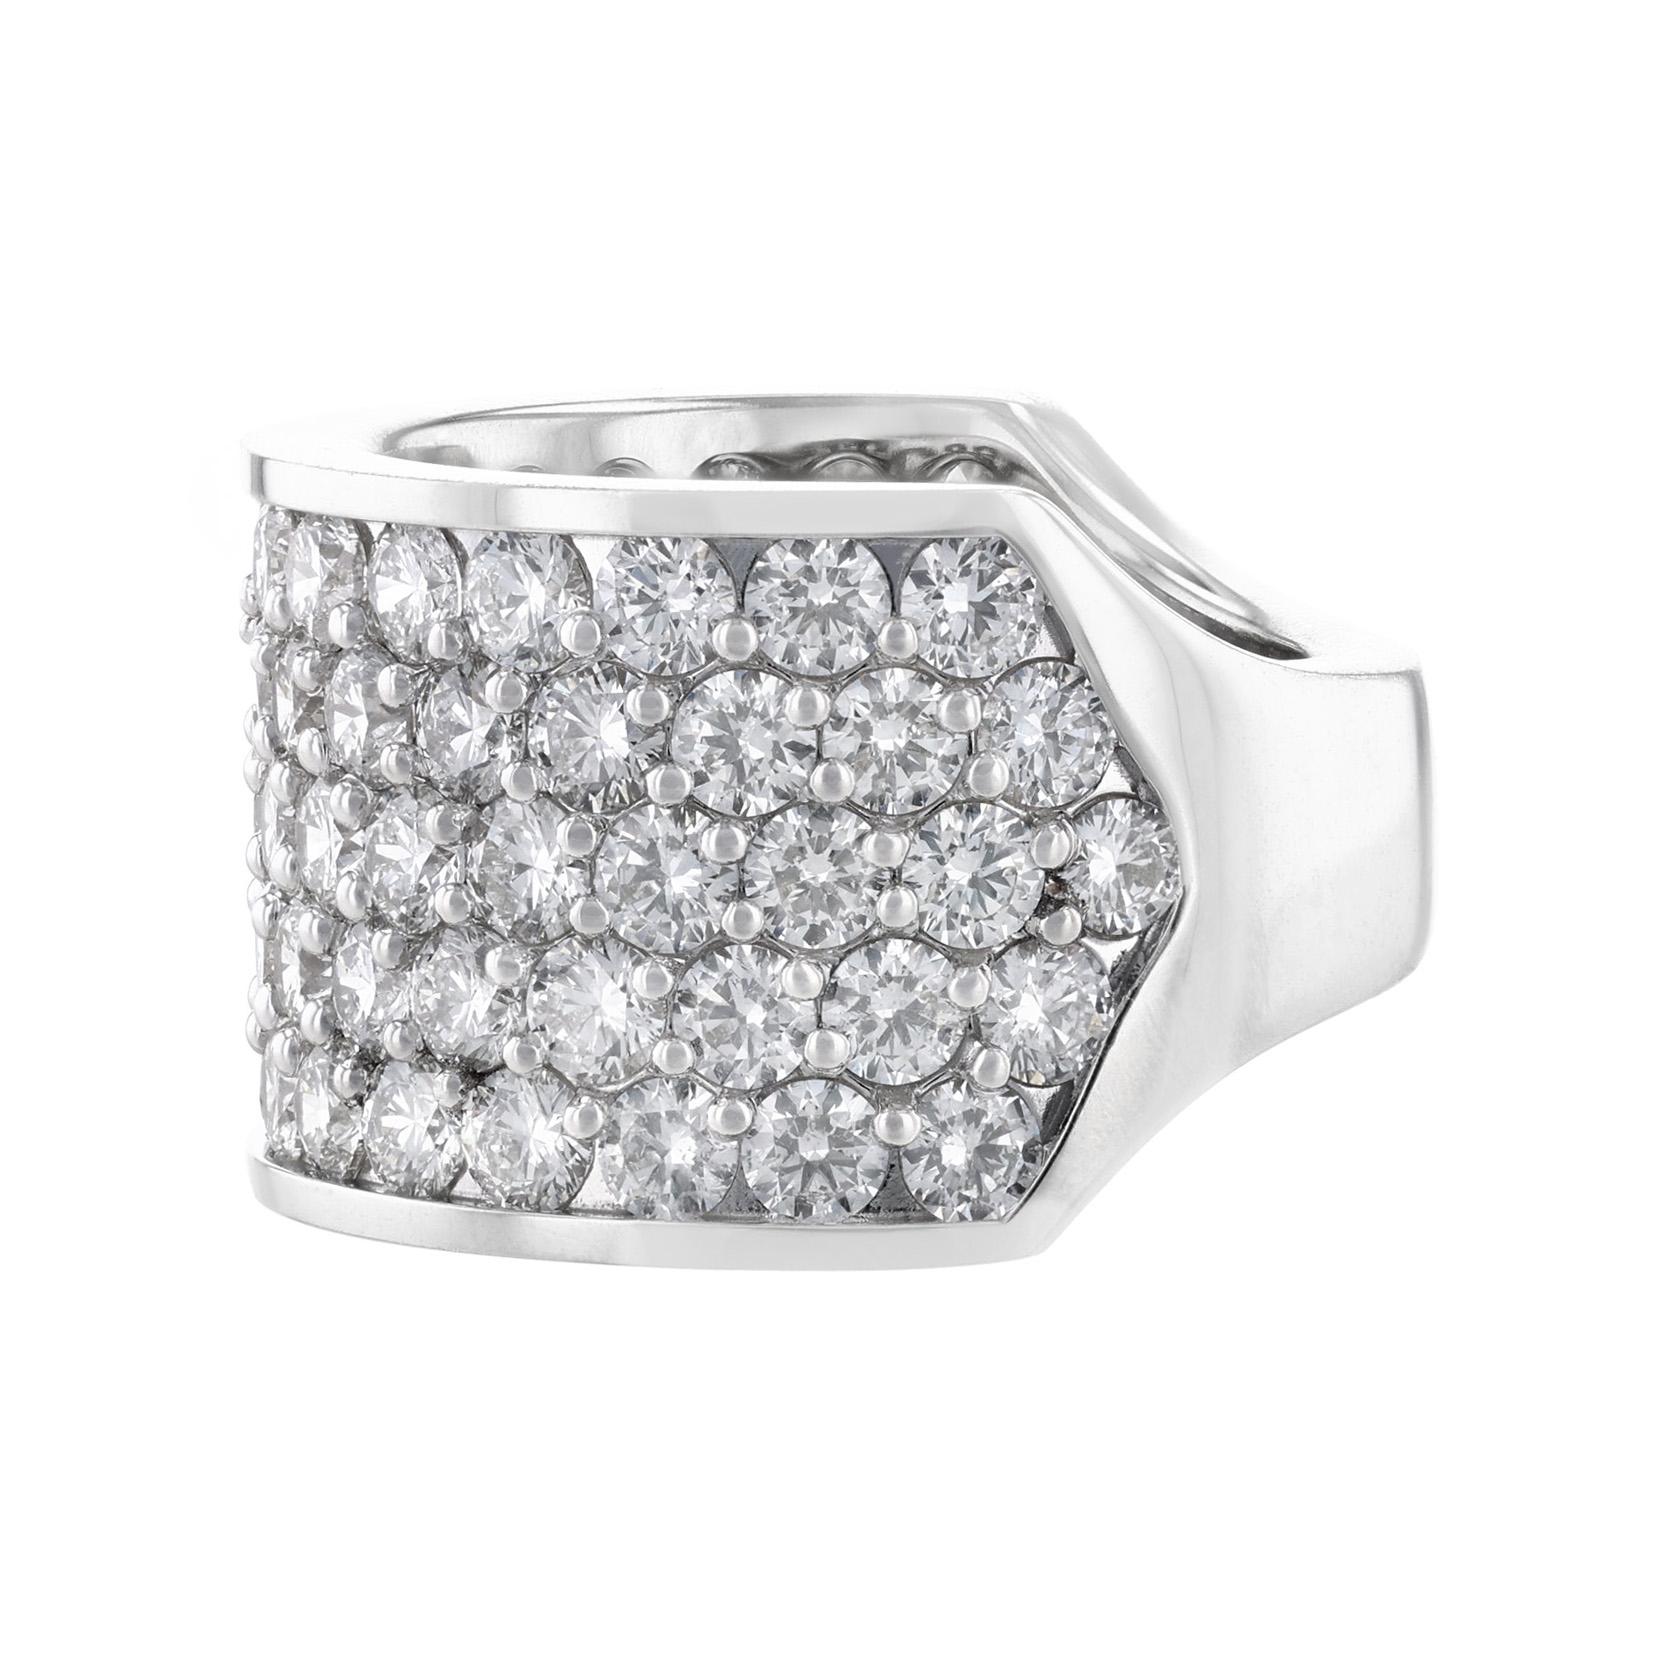 This men’s ring is 14K white gold and features 79 round cut diamonds. All diamonds are pave' set and weigh 9.44 carats combined. The ring has a color grade of (H) and a clarity grade of (I1) and (SI2).
